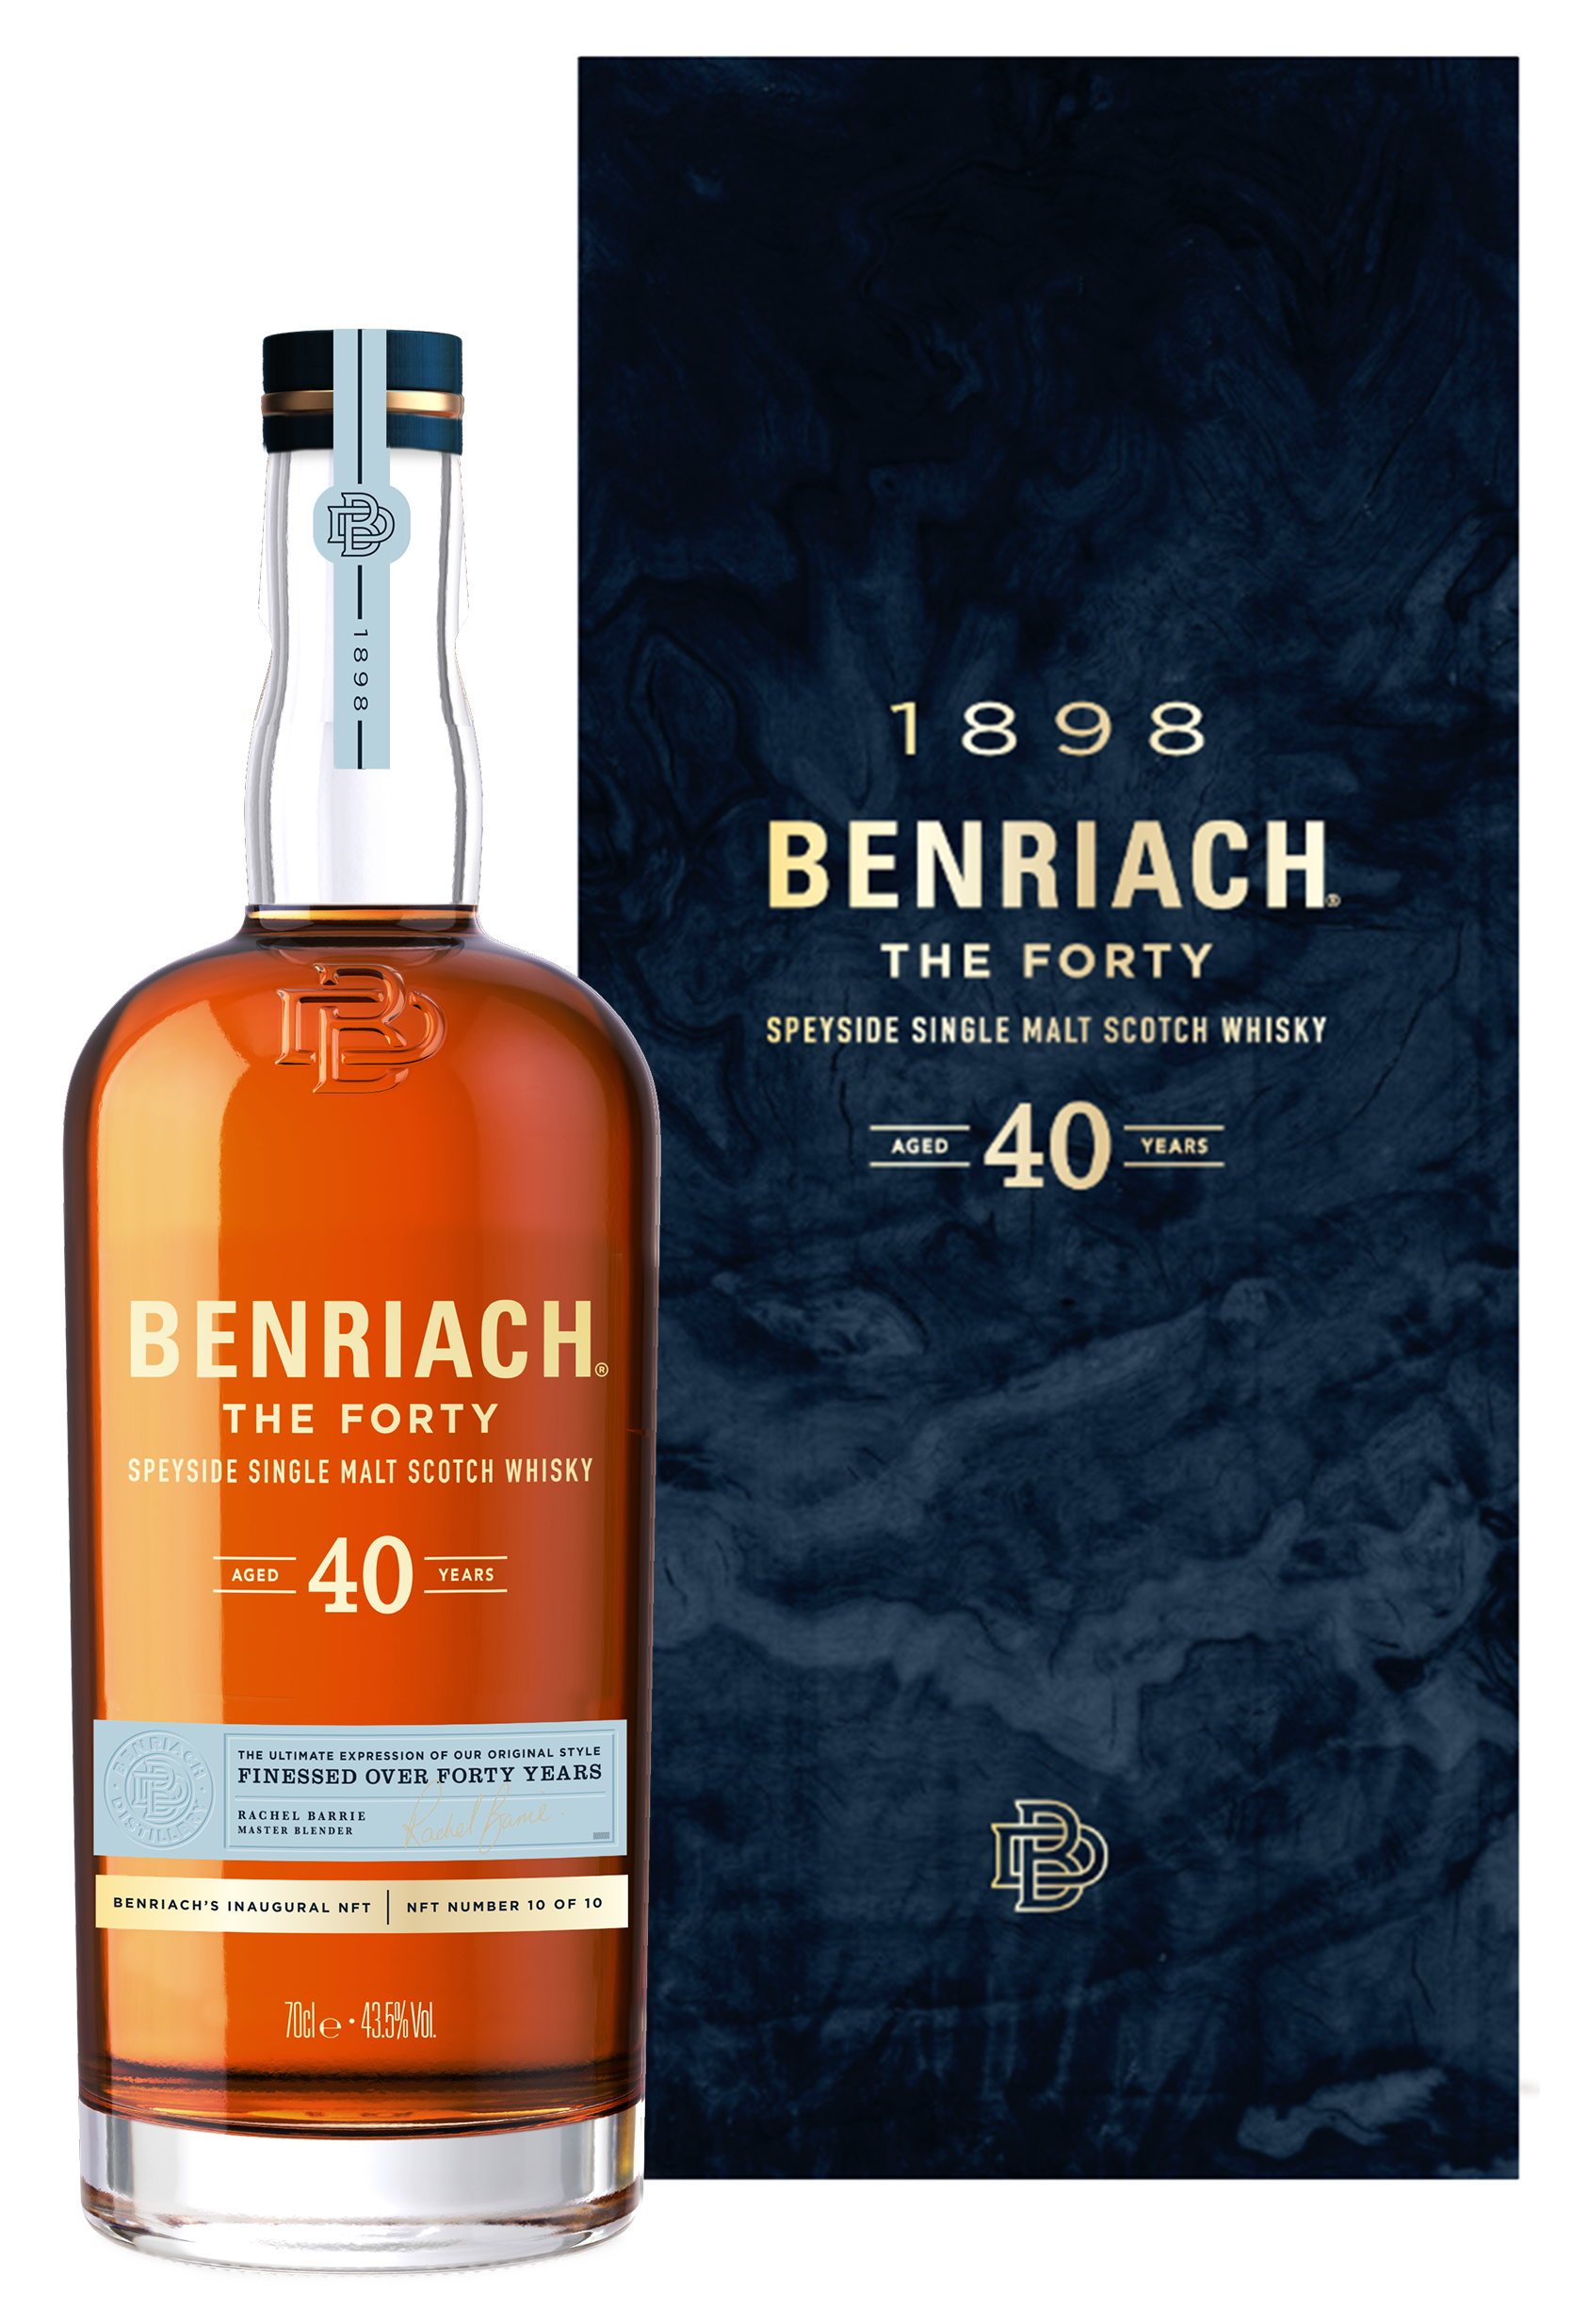 Benriach The Forty 40 Year Old Single Malt Scotch Whisky